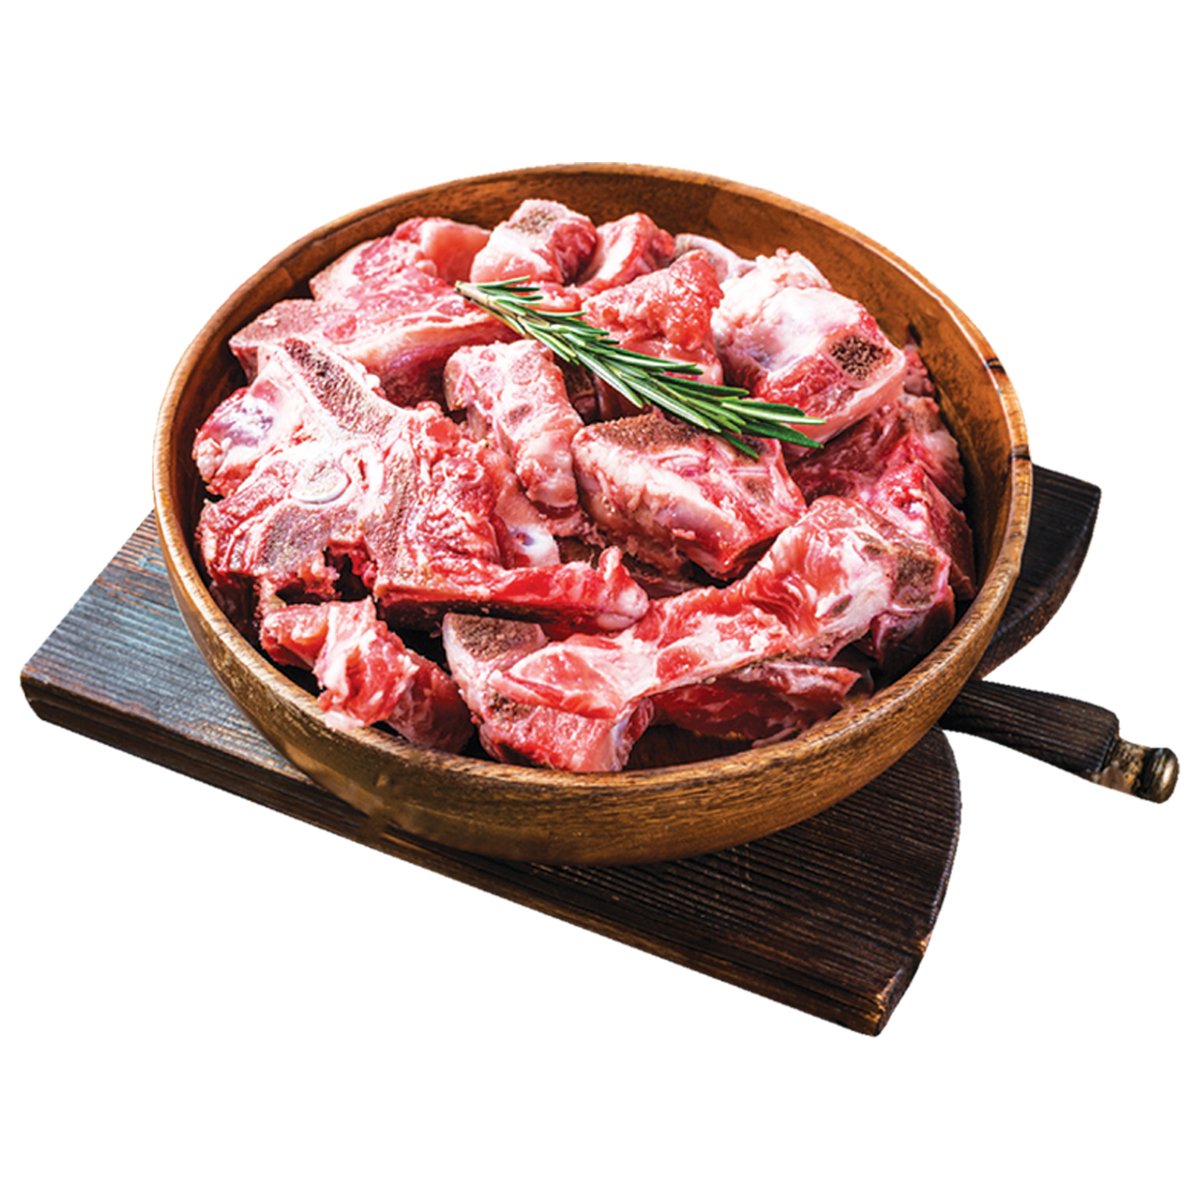 Egyptian Chilled Beef Leg Bone In 500g Approx. Weight